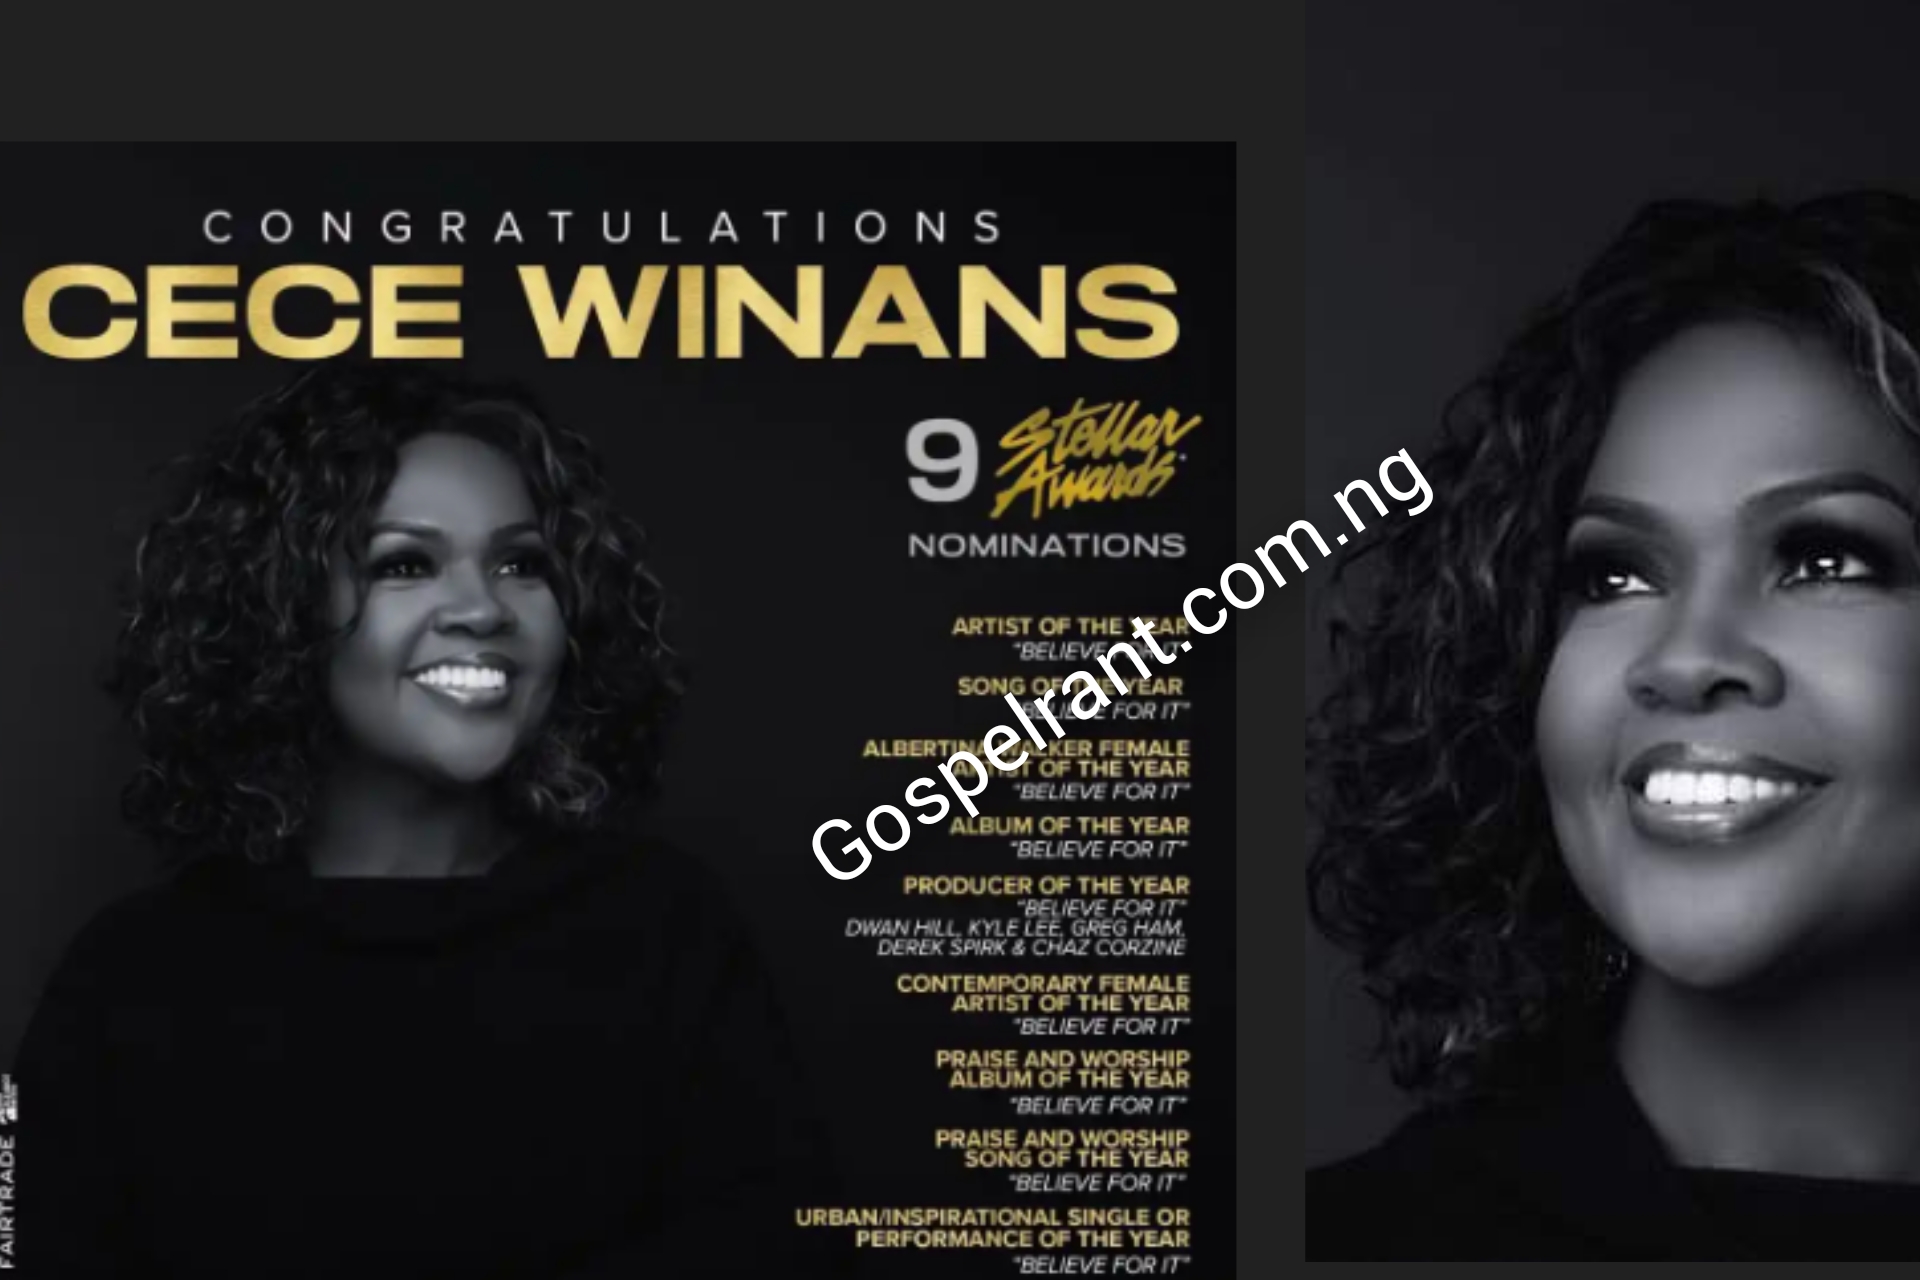 Stellar Awards 2022 Nominations CeCe Winans Nominated For 9 Categories